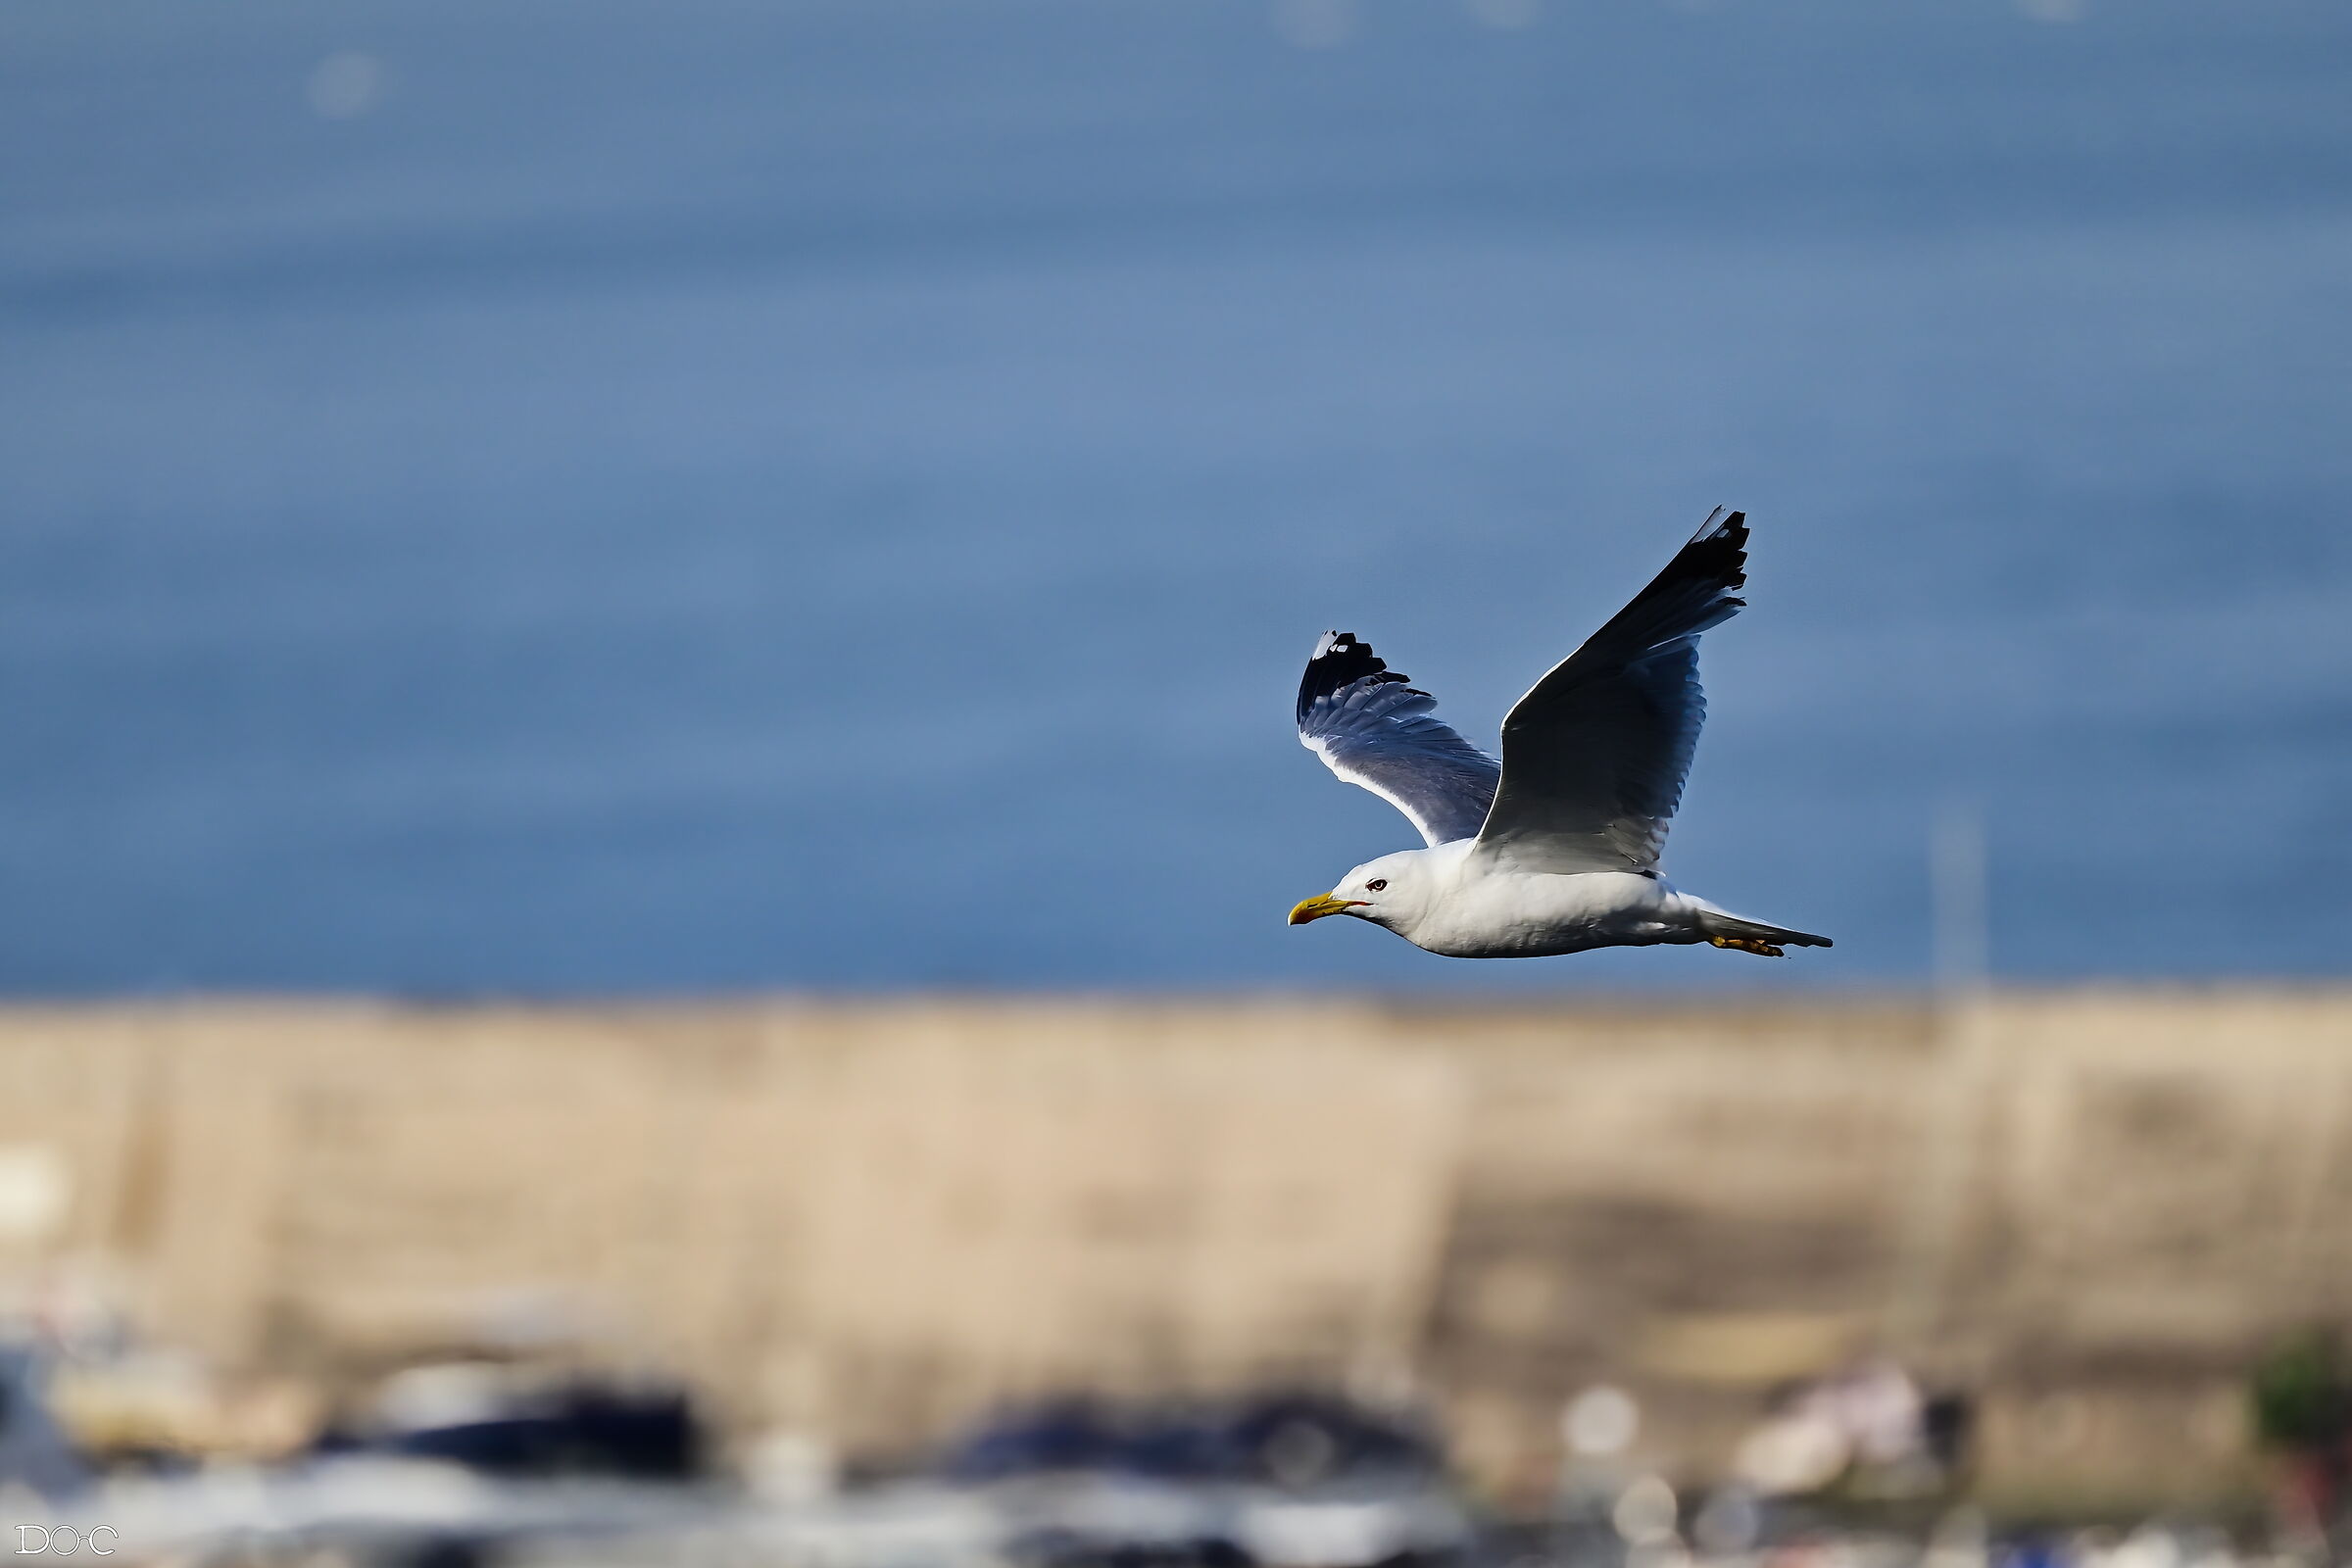 "The higher the seagull flies, the farther it sees."...